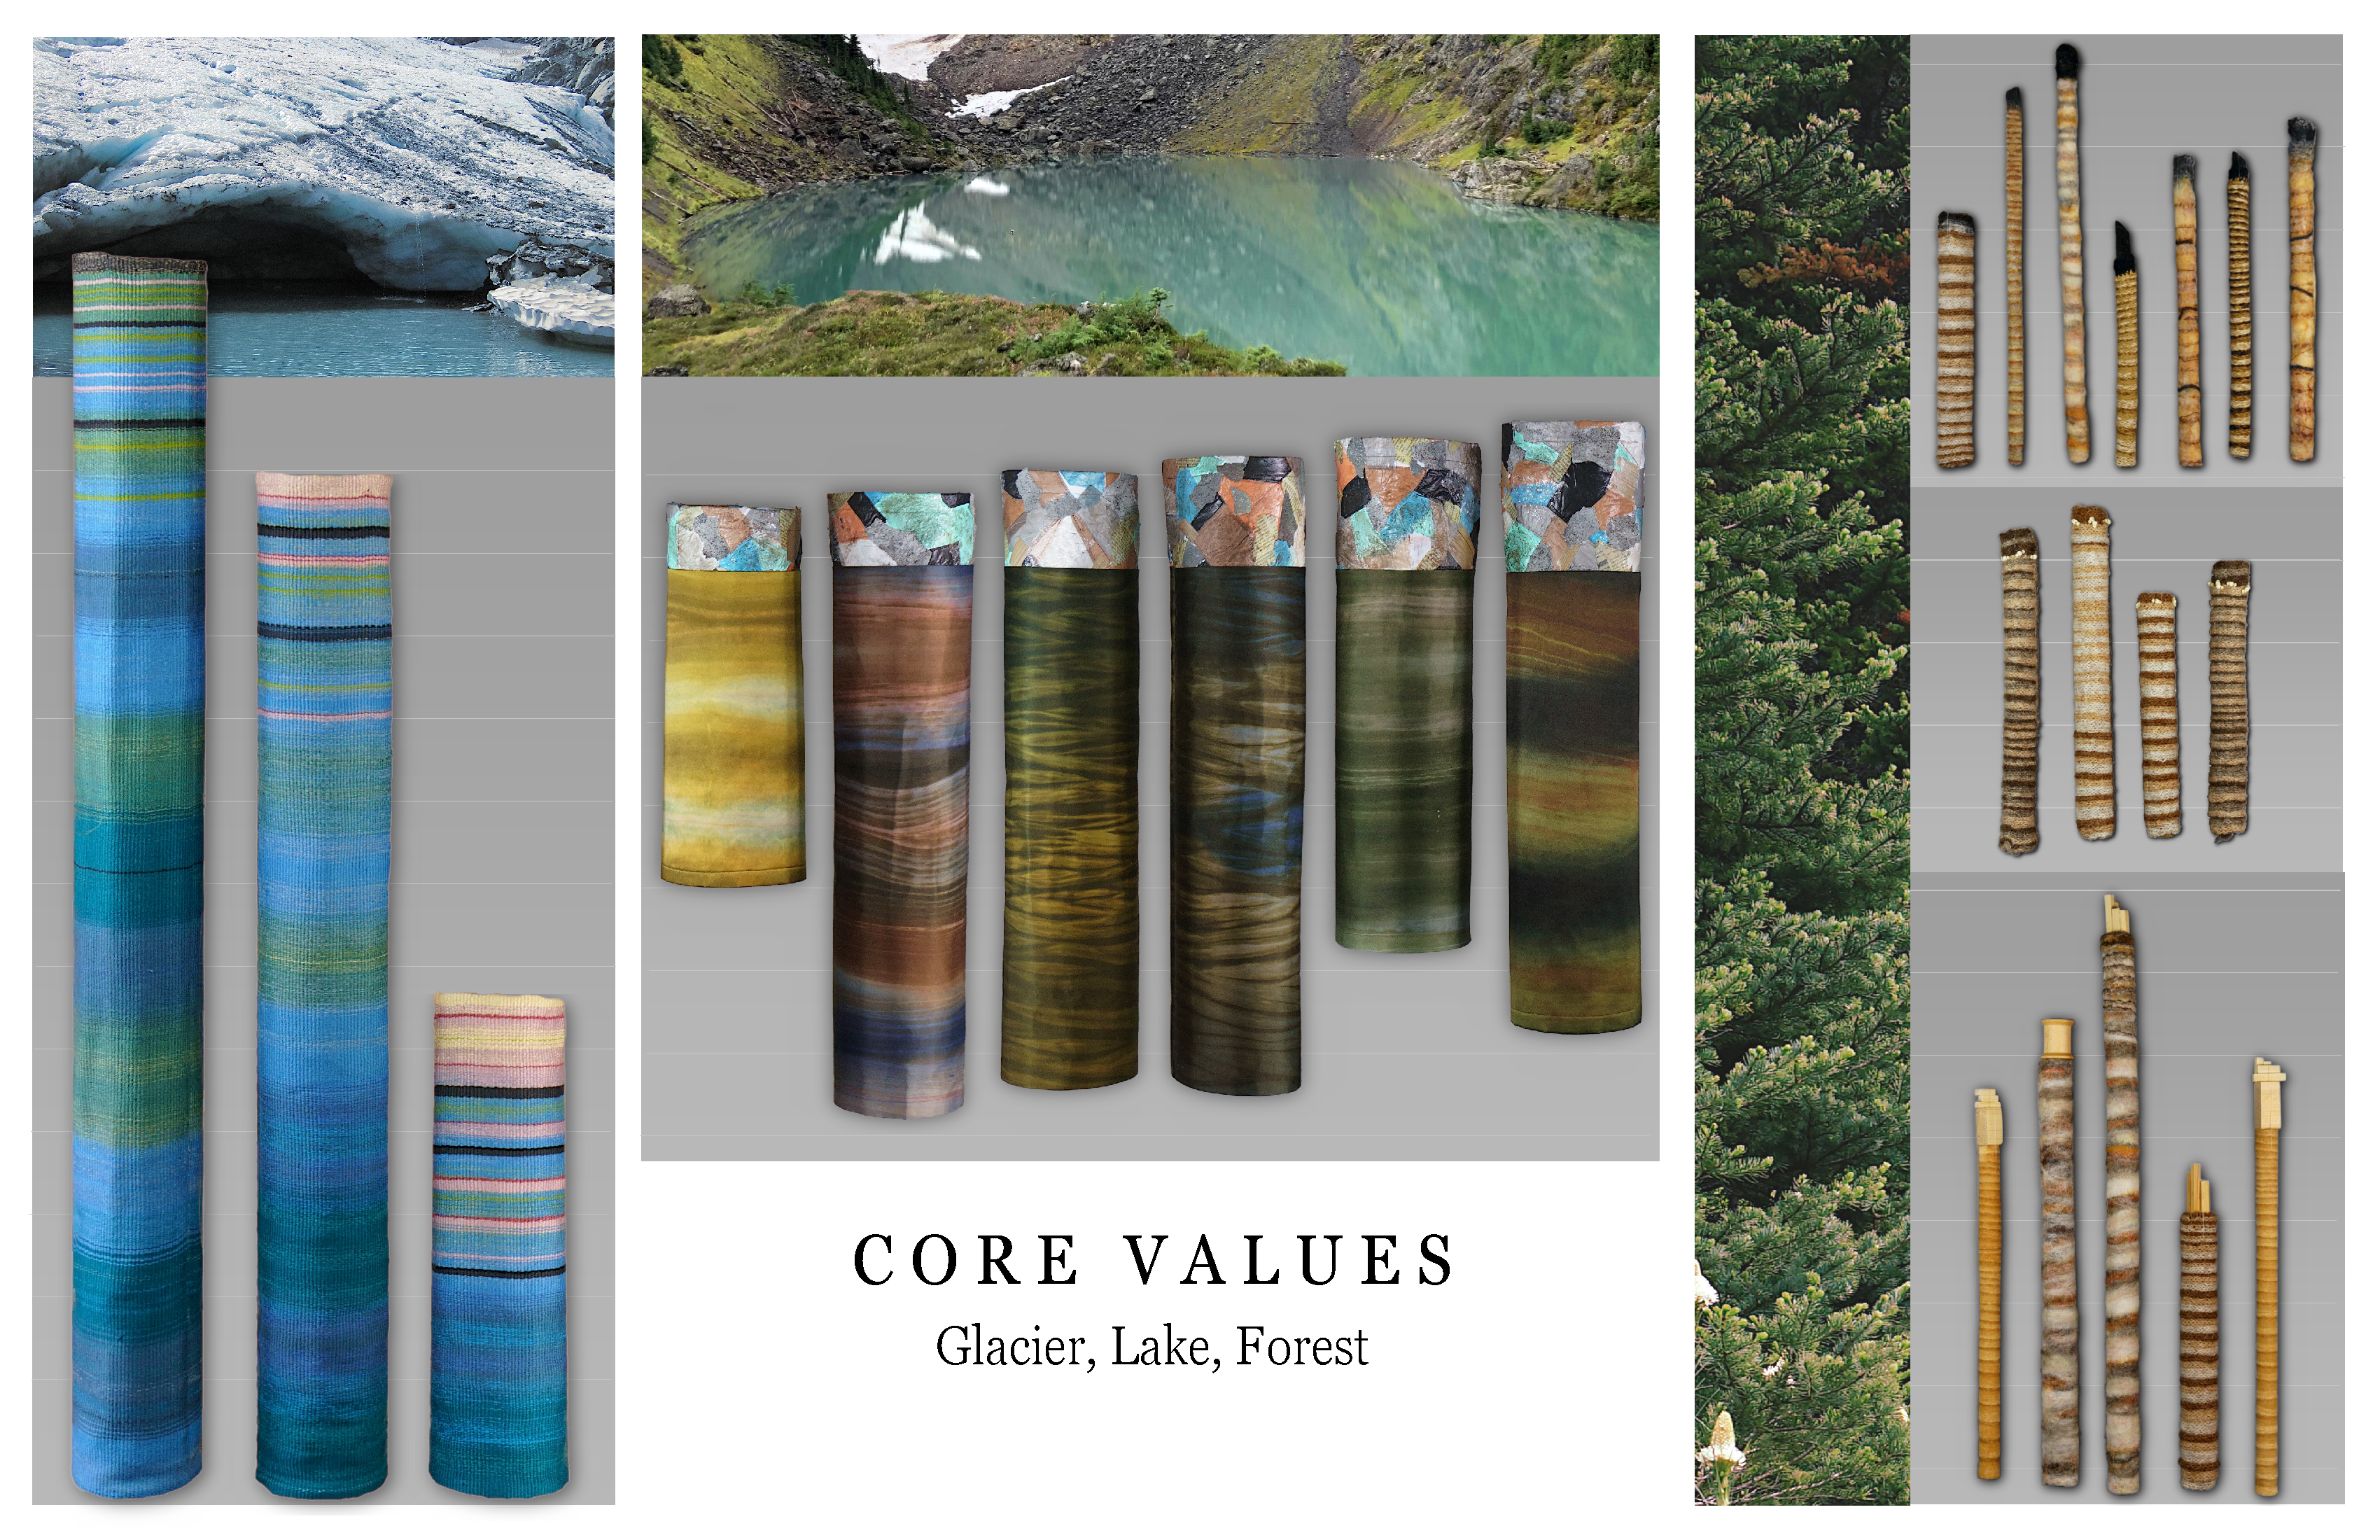 Labeled "CORE VALUES Glacier, Lake, Forest", three sections of a phot and a set of fabric cylinders. A glacier and three fabric representations of ice cores, a lake photo and several multicolored fabric cylinders, and a tree with fabric "tree cores."